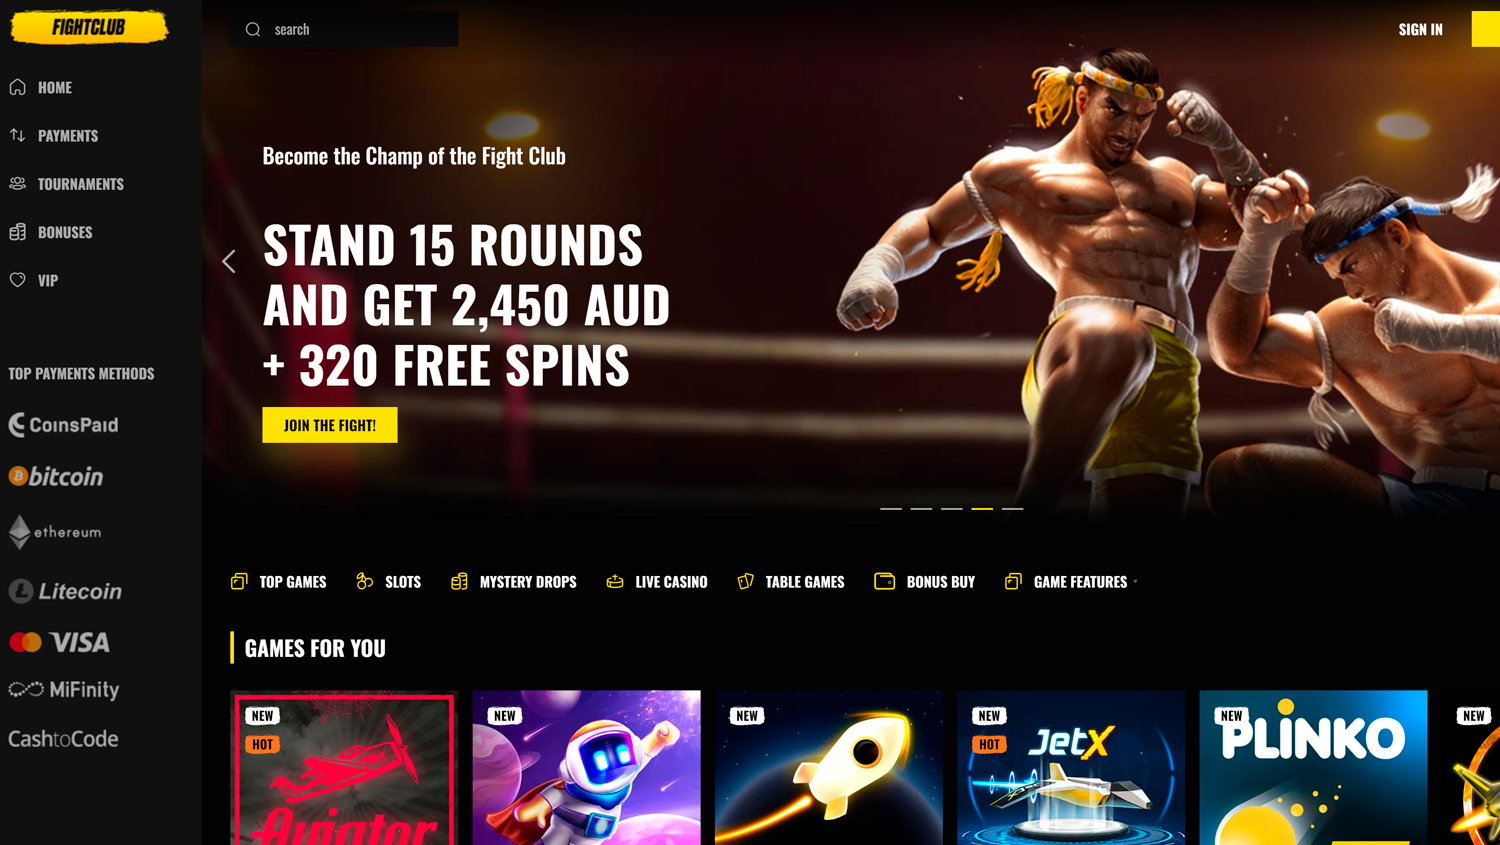 Main page on Fight club casino site